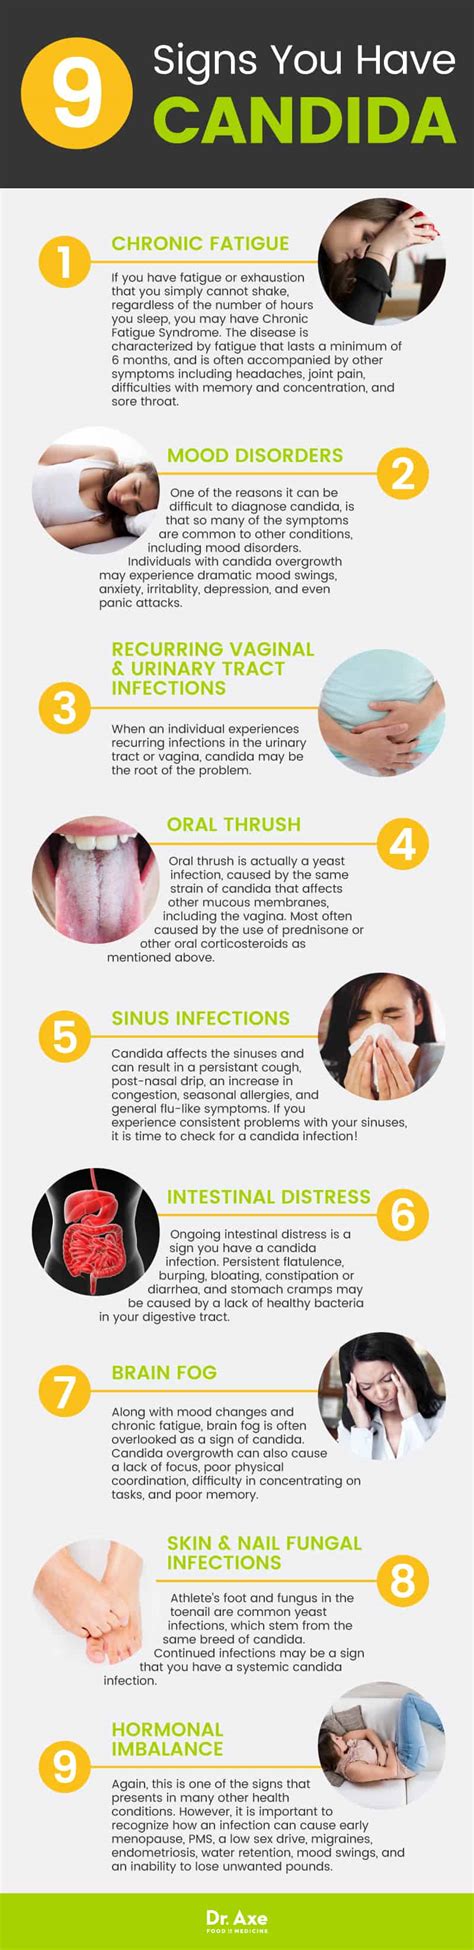 Candida Symptoms Steps To Treat Them Naturally Dr Axe